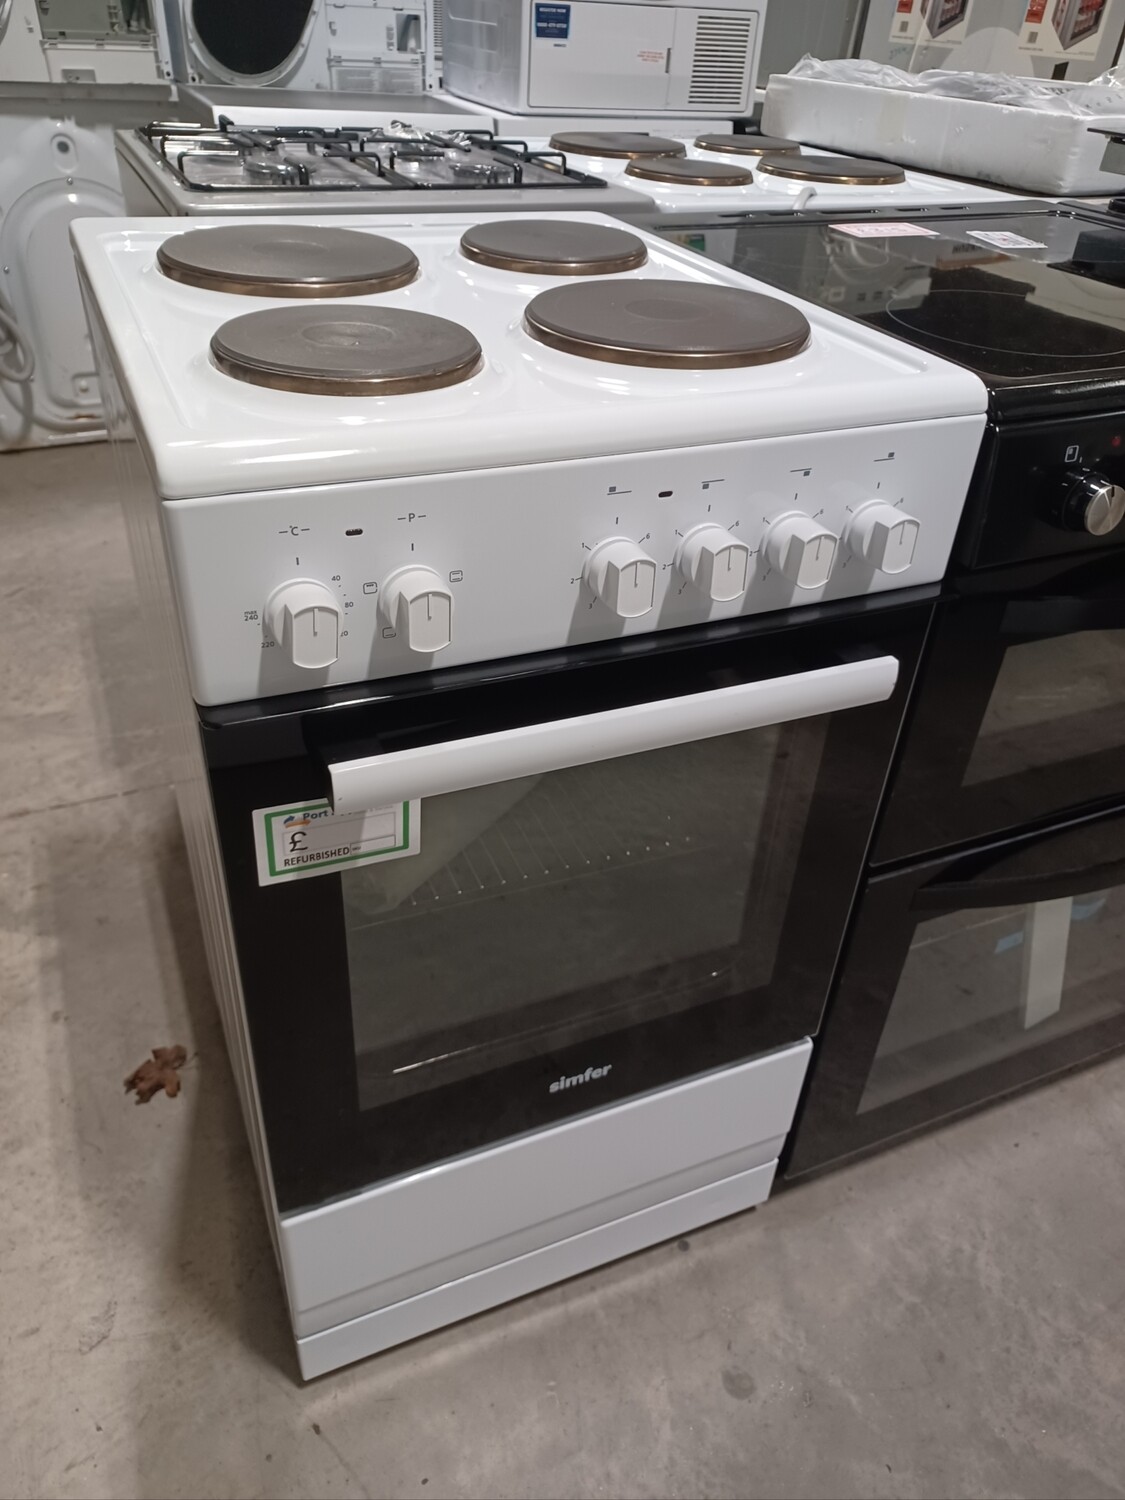 Simfer 50cm Electric cooker White  - Refurbished + 6 month guarantee 